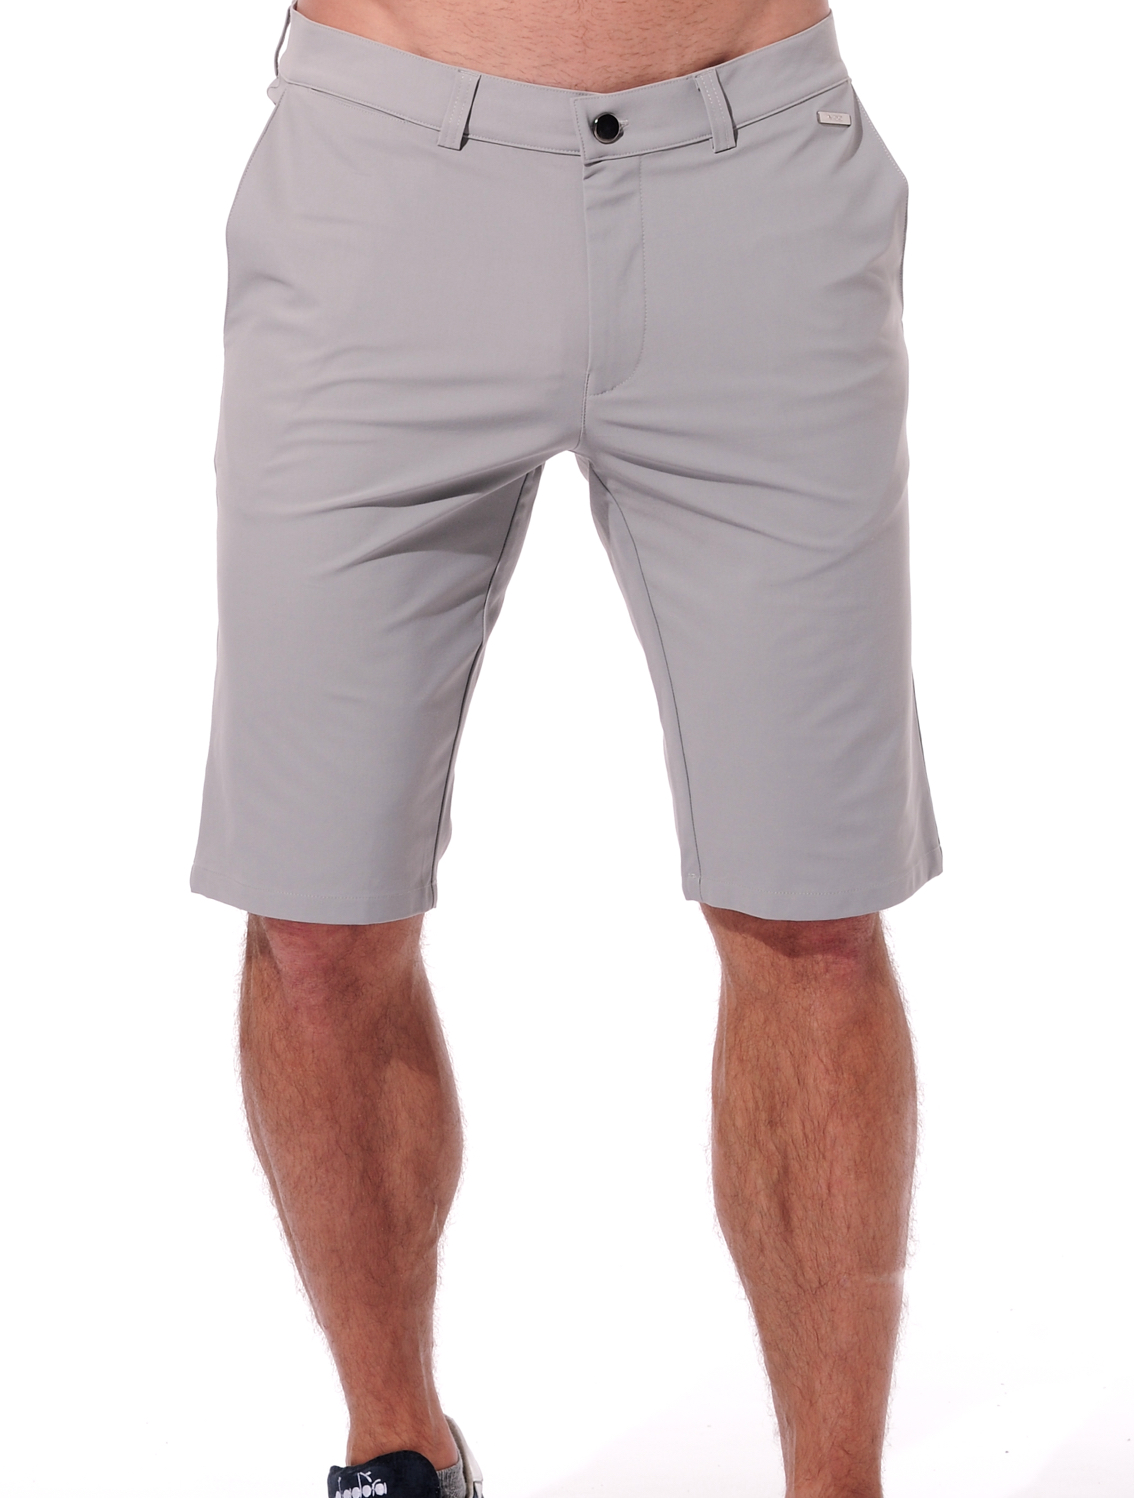 4way stretch shorts cement 